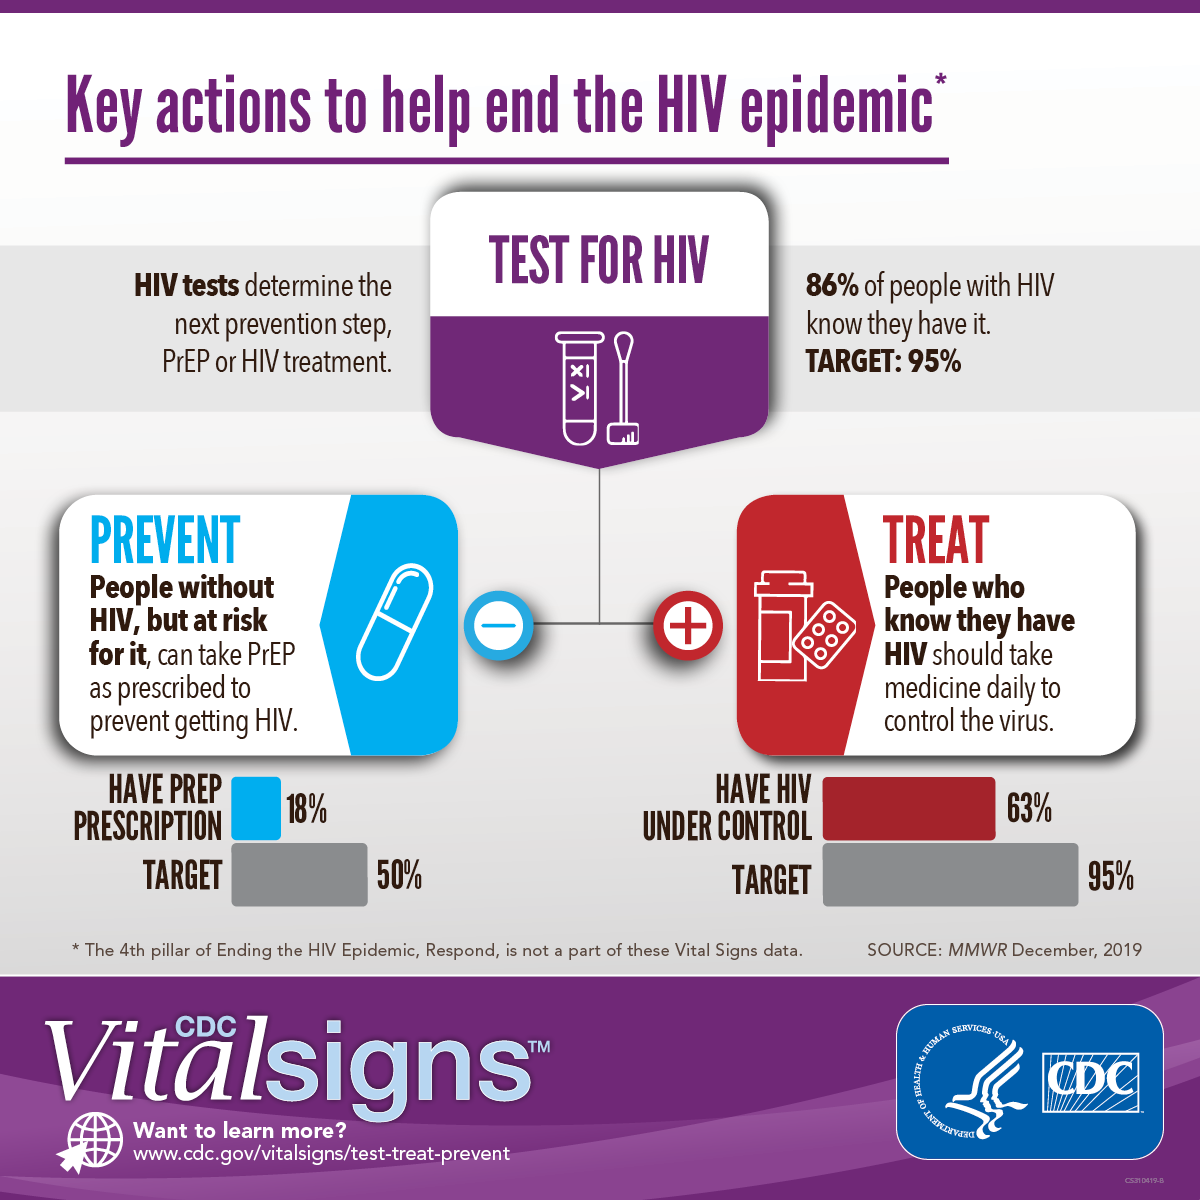 HIV Testing, Treatment, Prevention Not Reaching Enough Americans